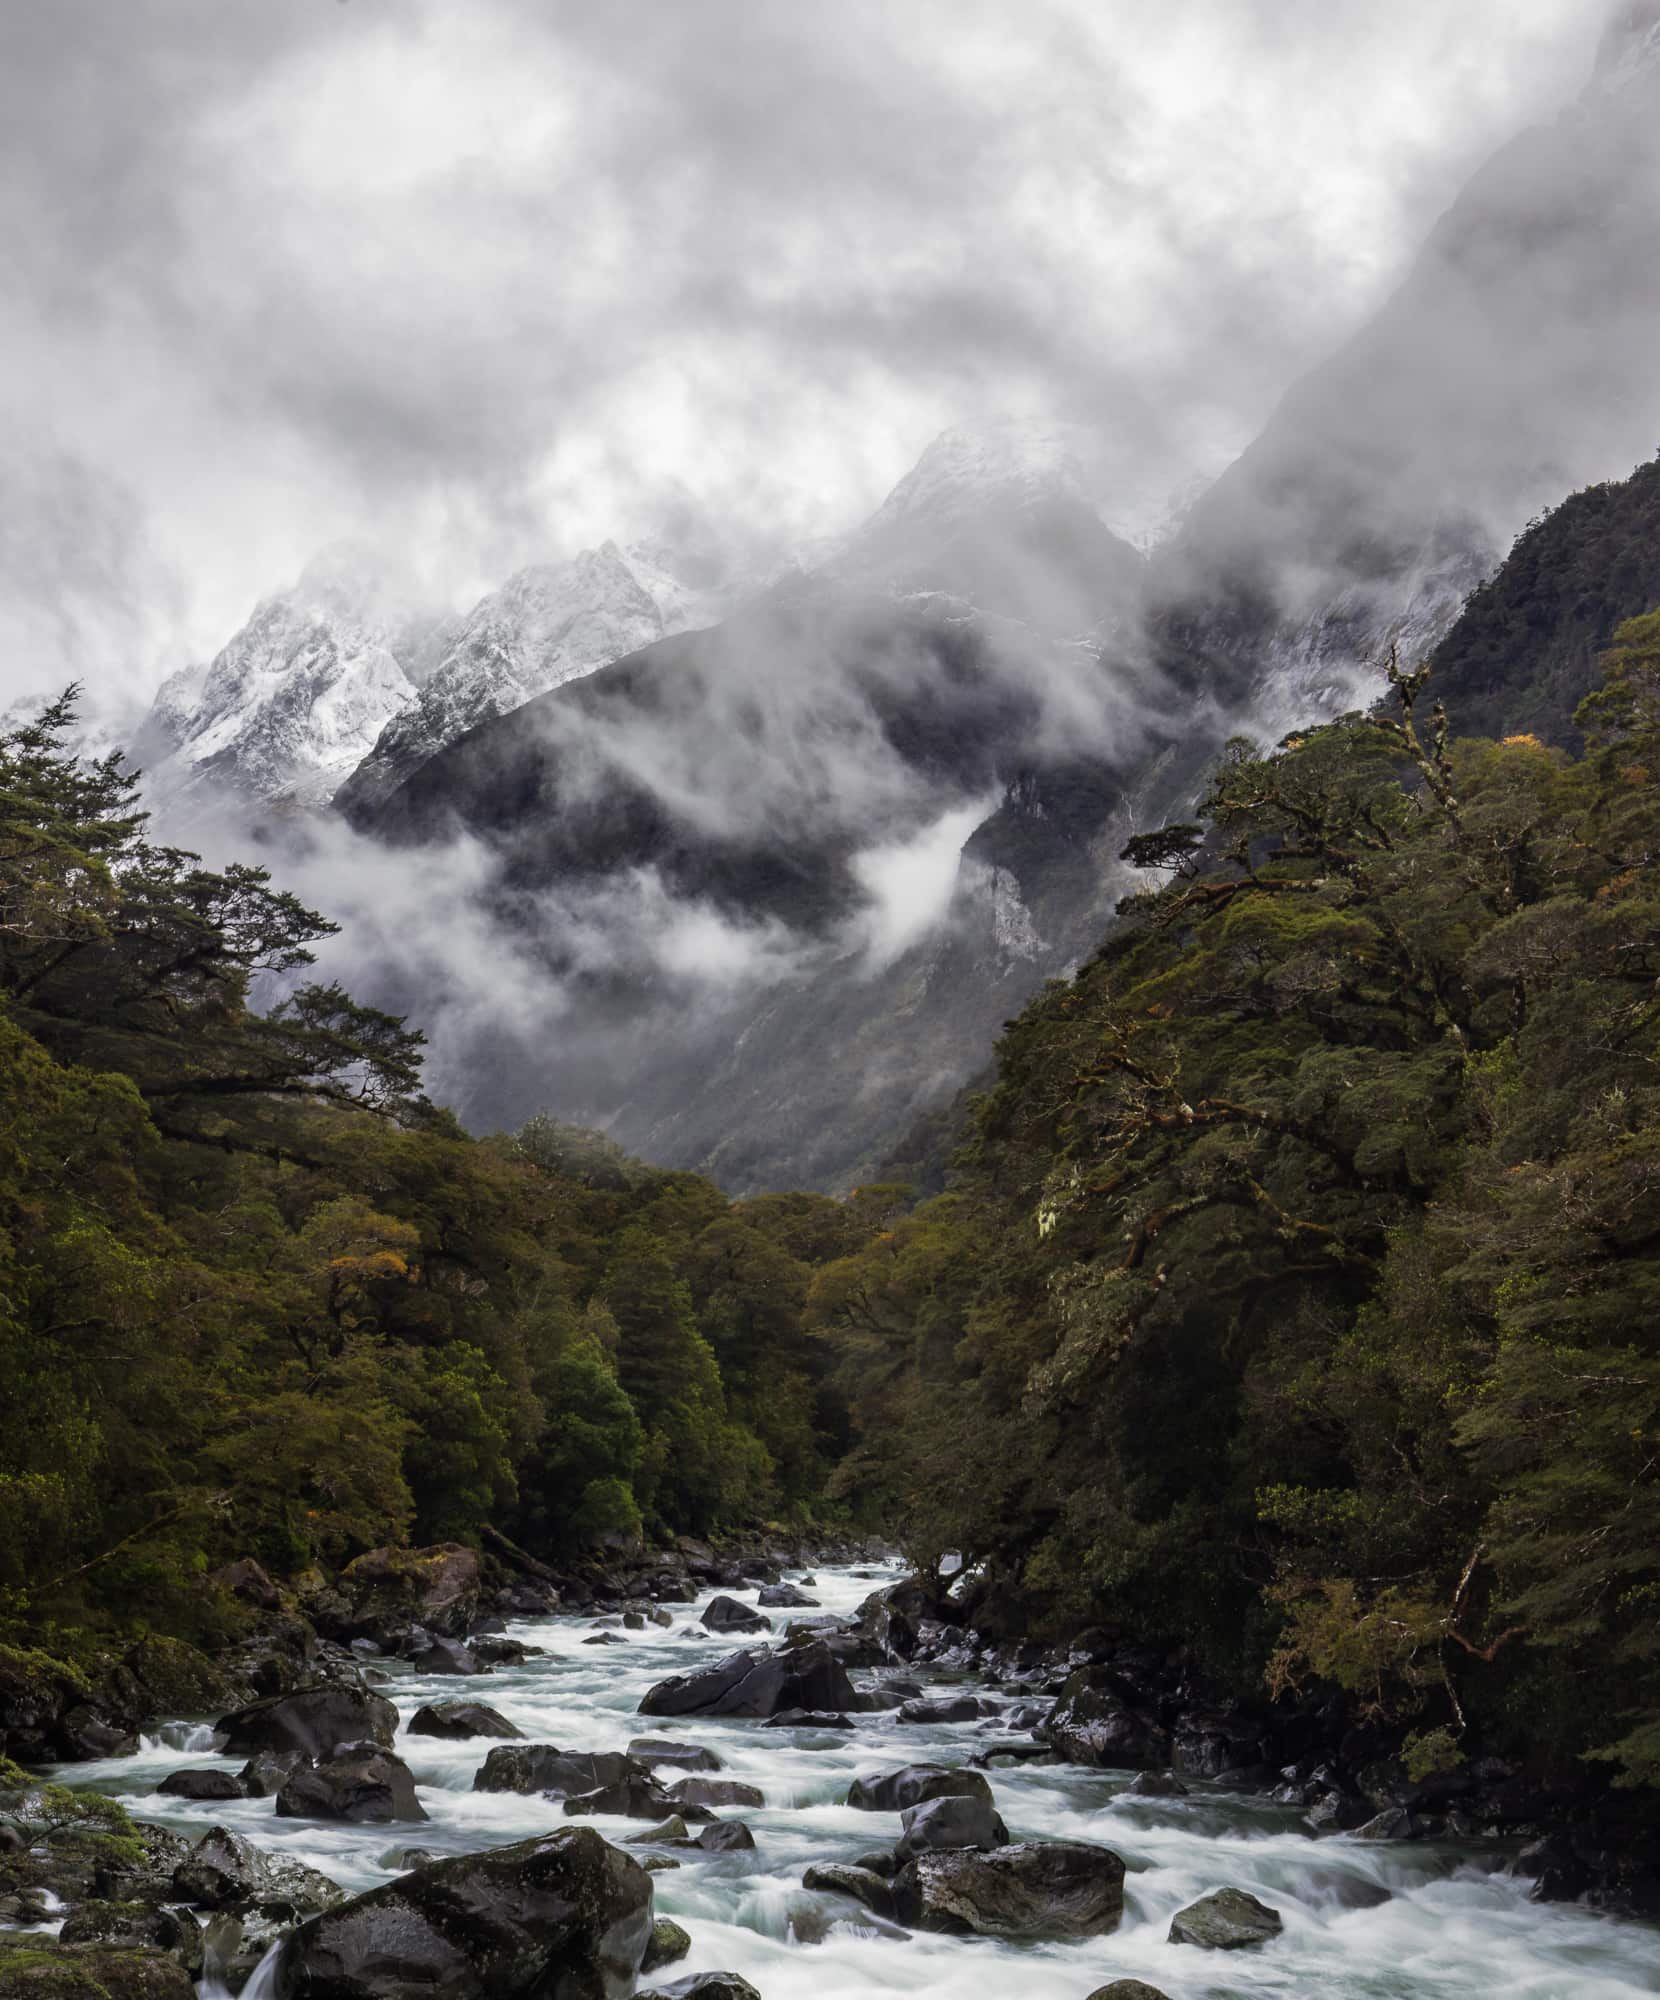 A powerful river cuts through a verdant forest with snow-covered mountains enshrouded in mist in the background at Milford Sound, New Zealand.